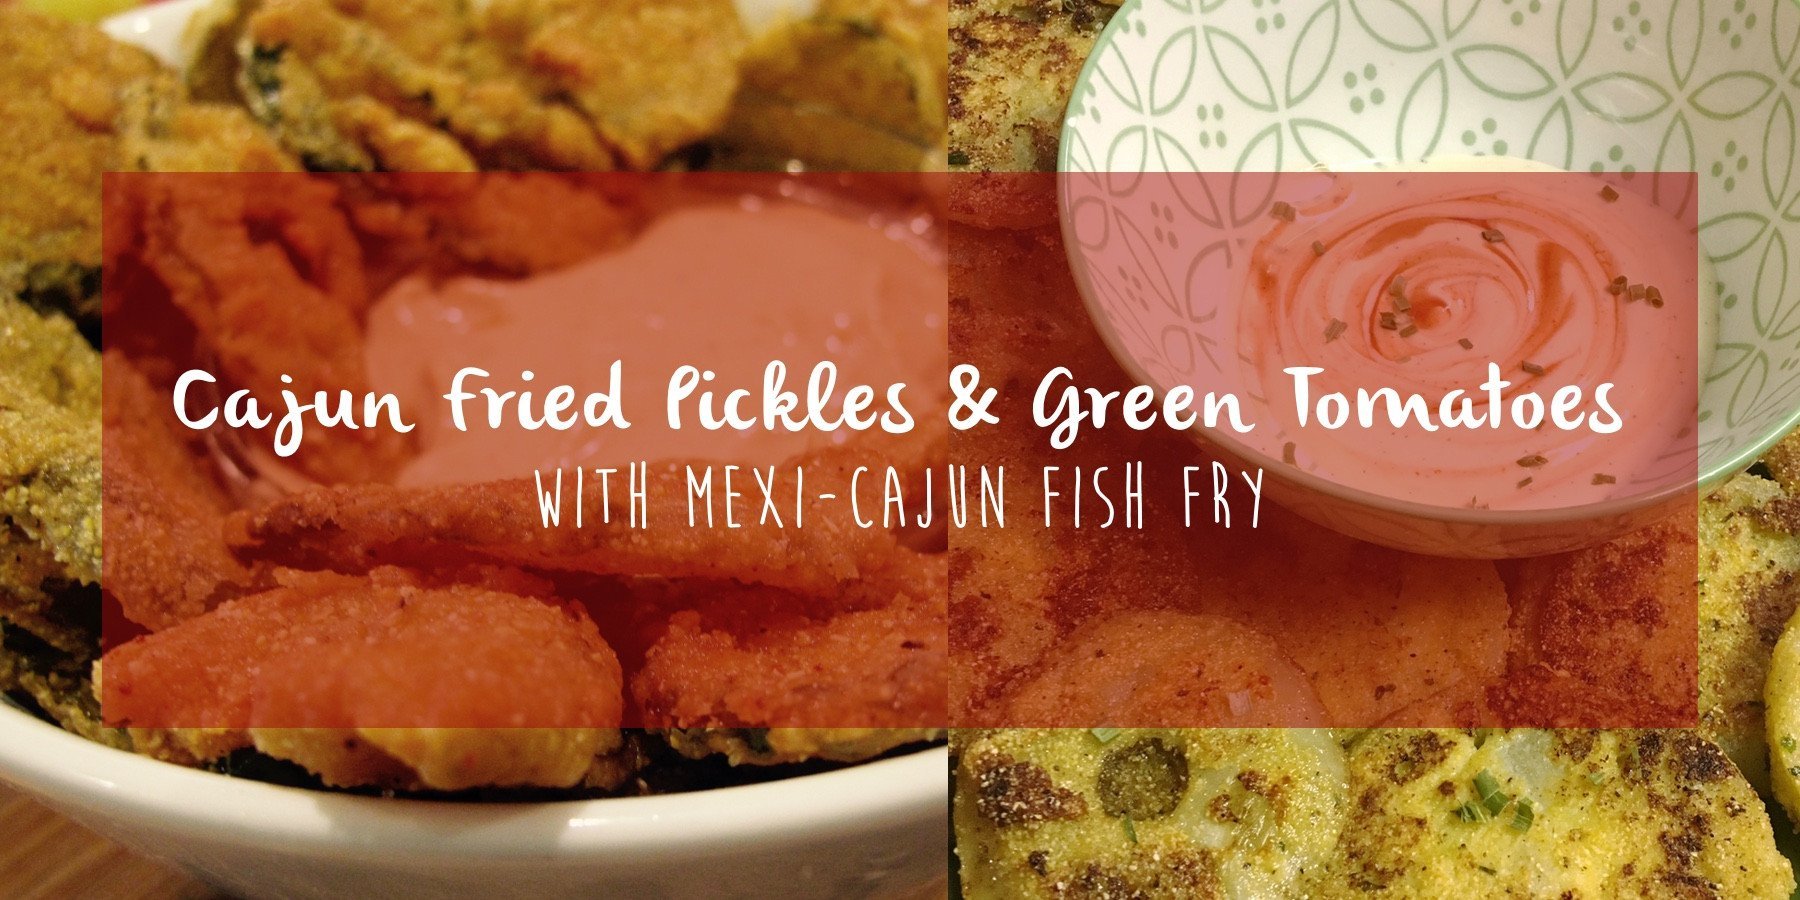 Cajun Fried Pickles & Green Tomatoes